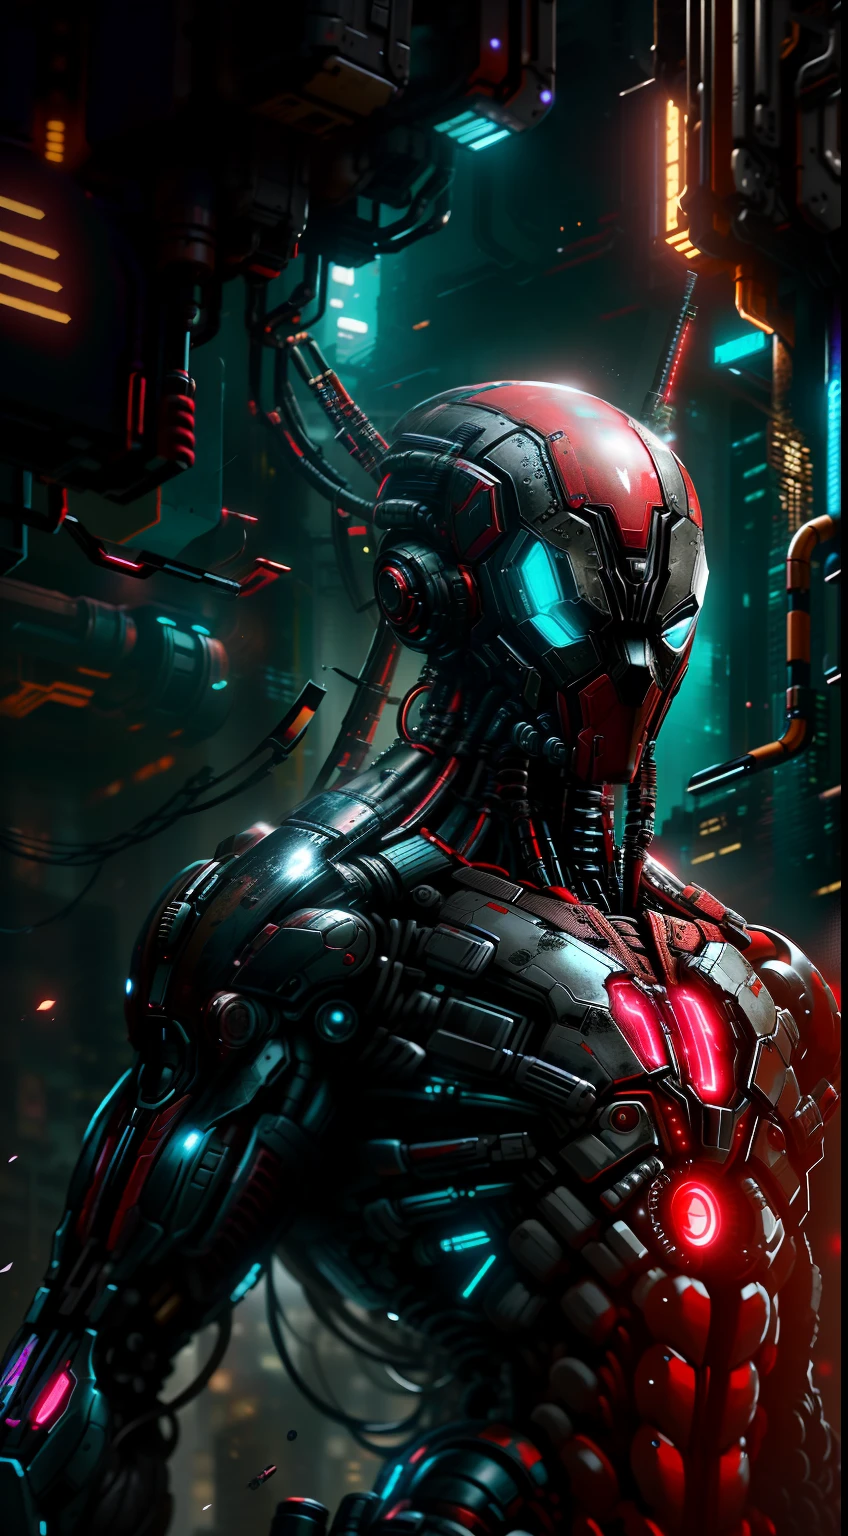 Deadpool from Marvel photography, biomechanics, complex robot, red, full growth, full body photo, hyper-realistic, crazy little details, incredibly clean lines, cyberpunk aesthetic, masterpiece featured on Zbrush Central, cyberpunk city backdrop